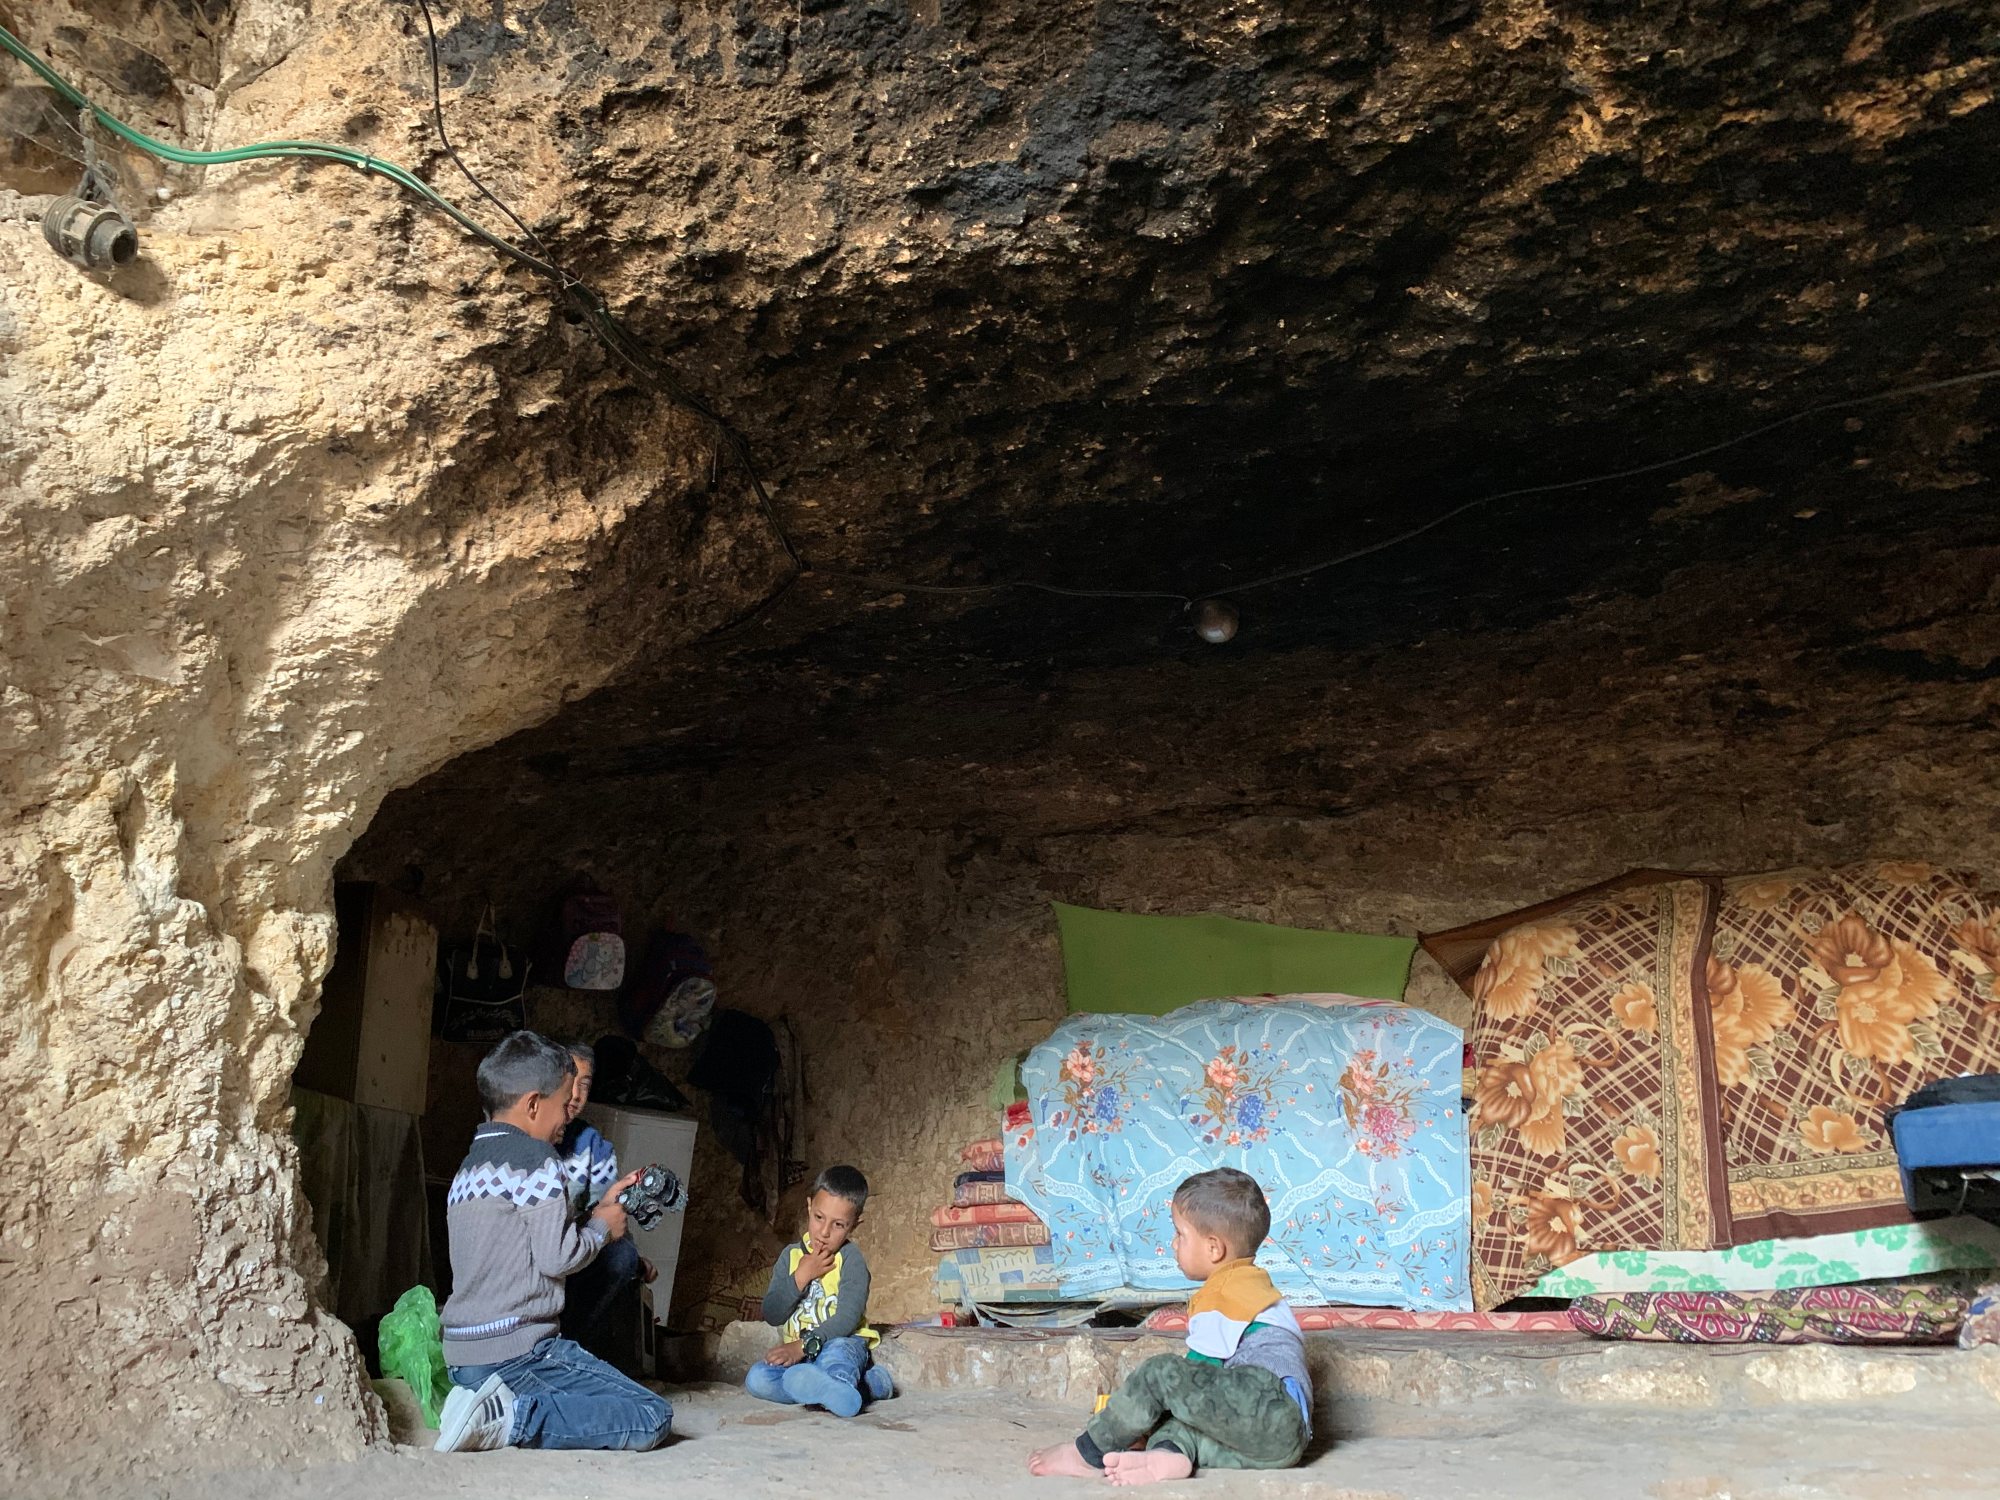 The Dababsa family, like many others in Masafer Yatta, has taken refuge in a cave (MEE/Shatha Hammad)